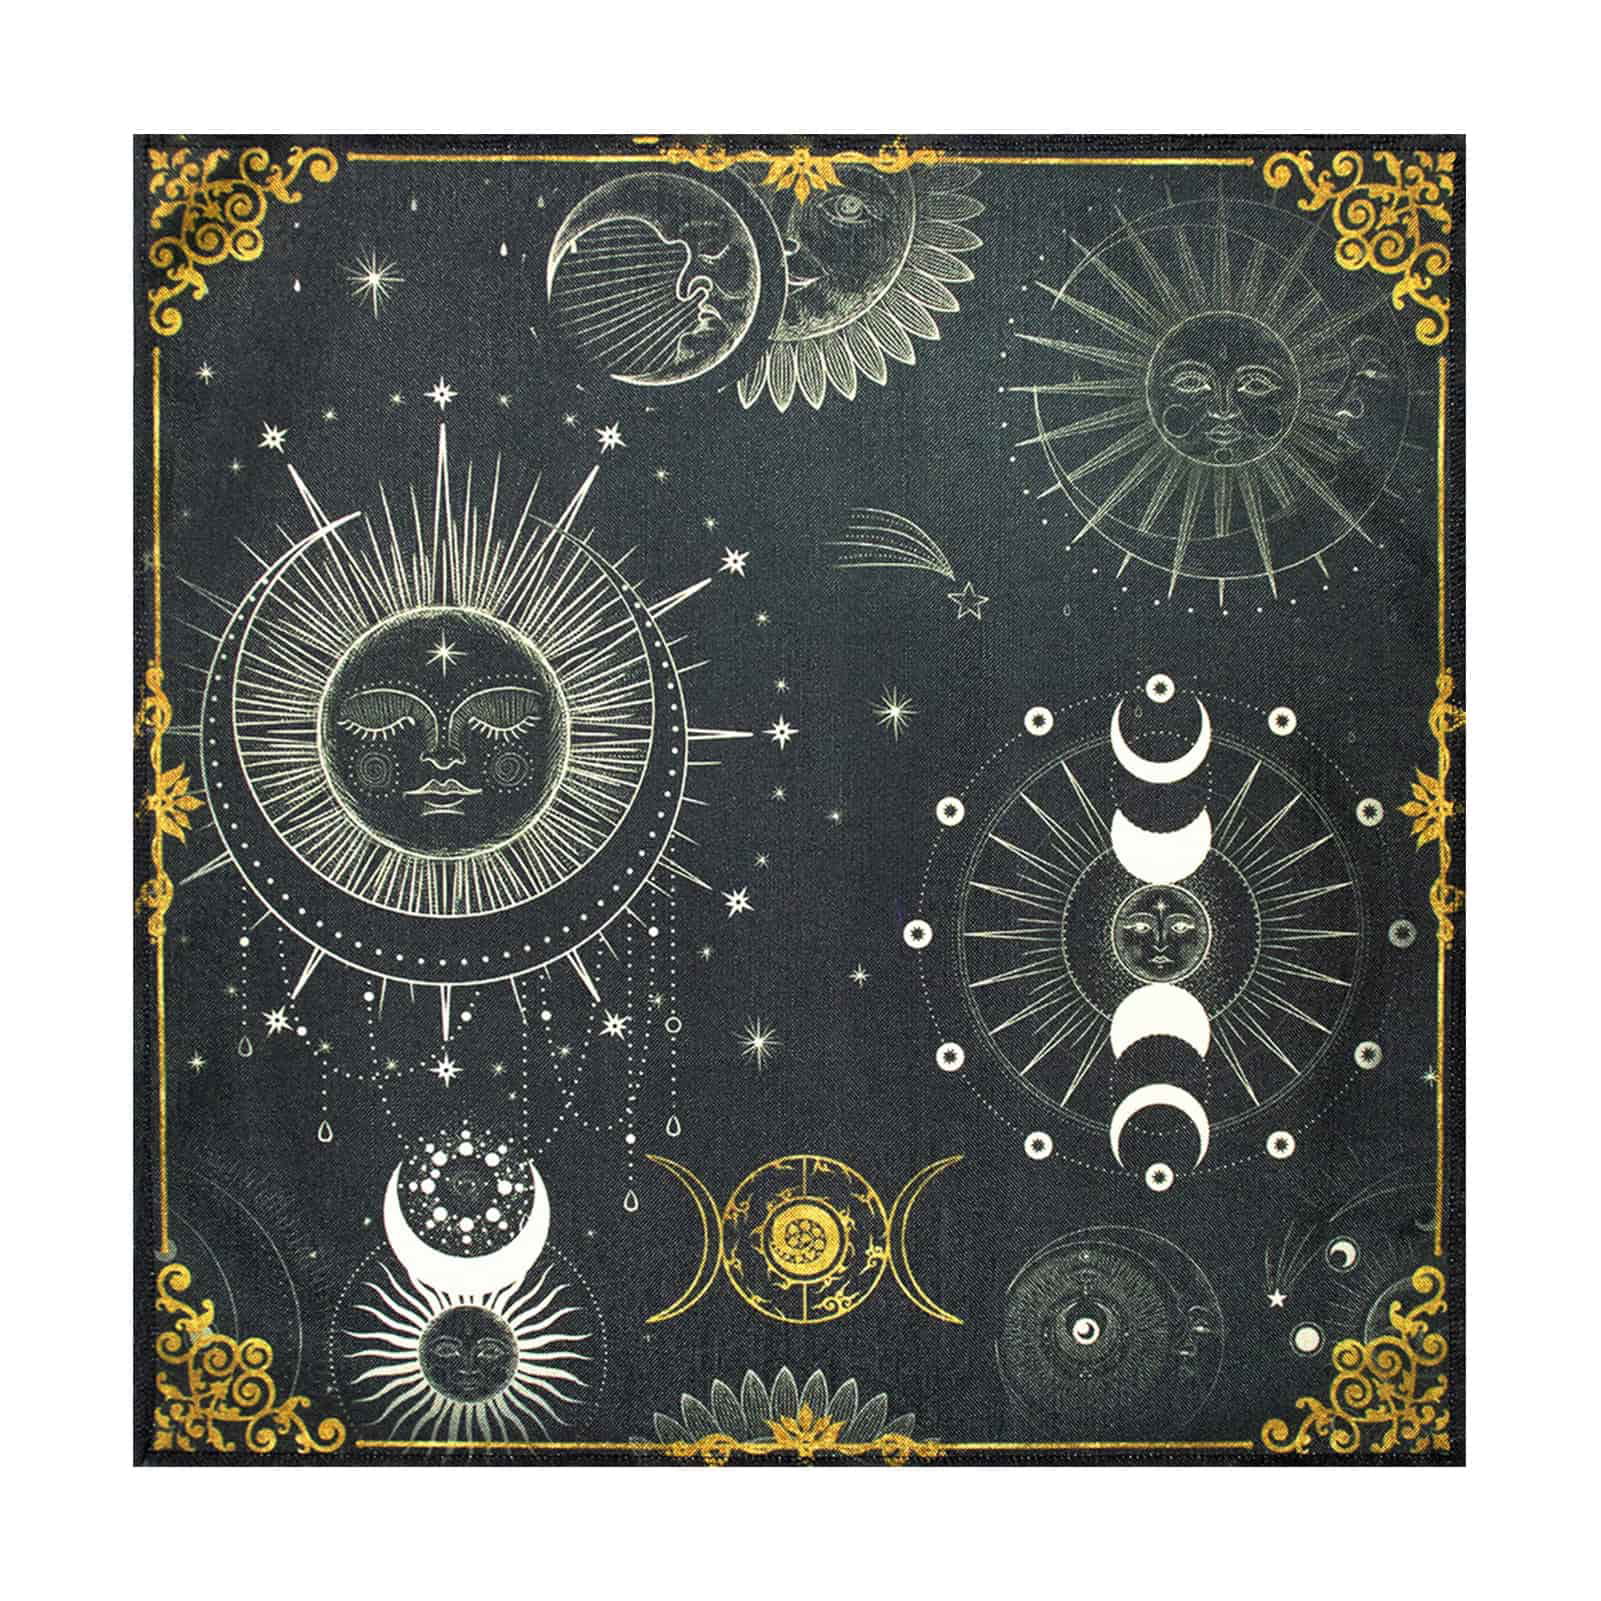 Large, 24 inches x 24 inches Moon Phases Altar Tarot Cloth Blue 